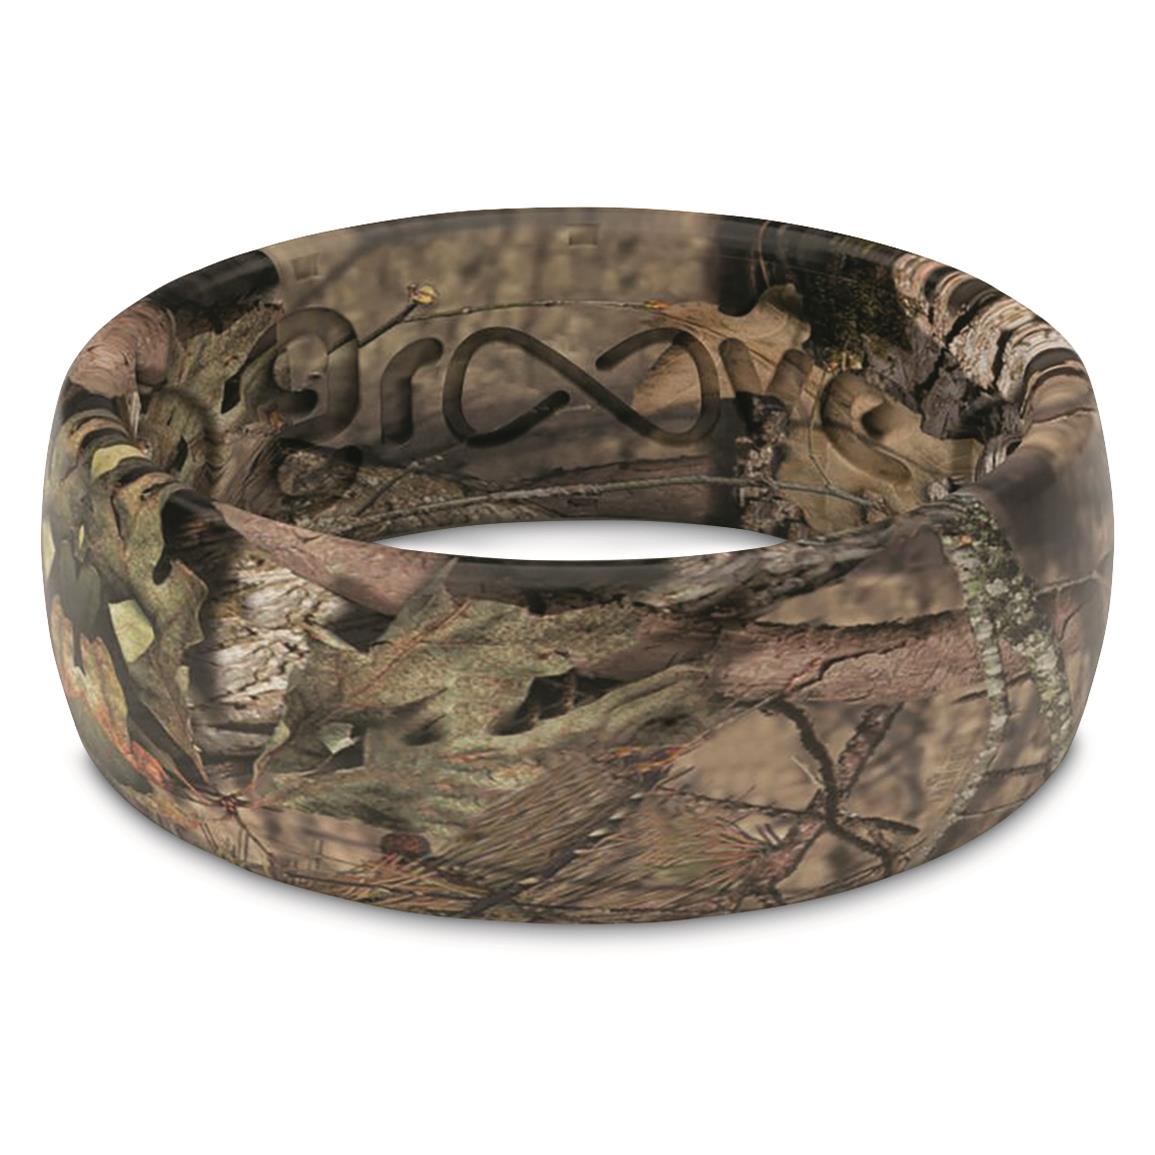 Groove Life Mossy Oak Men's Silicone Ring, Breakup